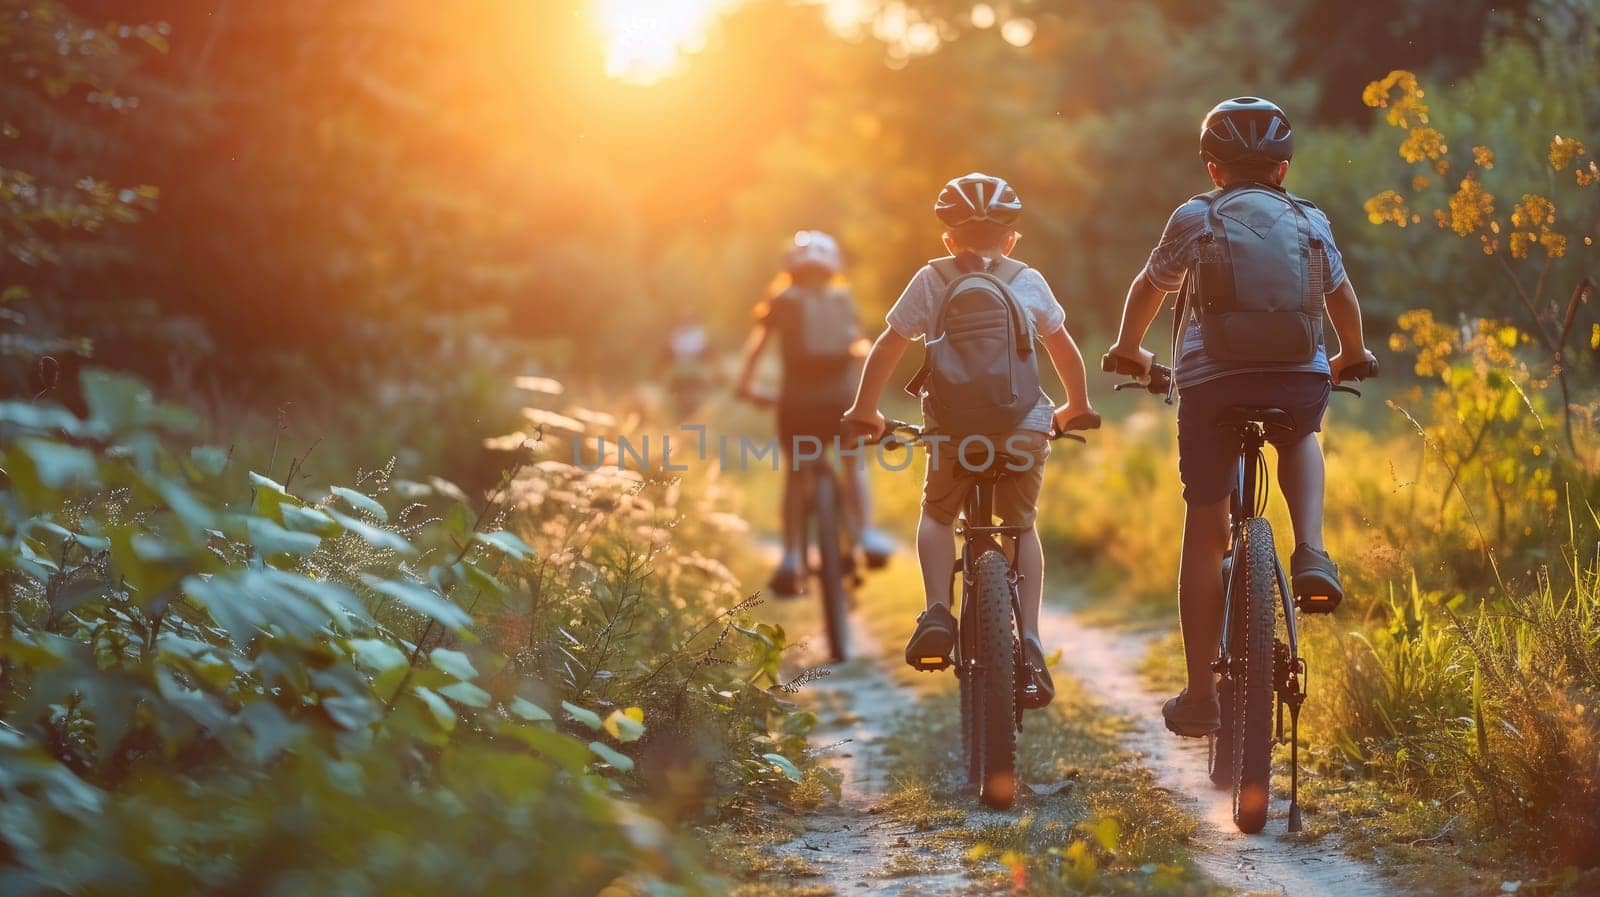 Family Fun: Parents and Children Cycling at Sunset for Summer Bonding..